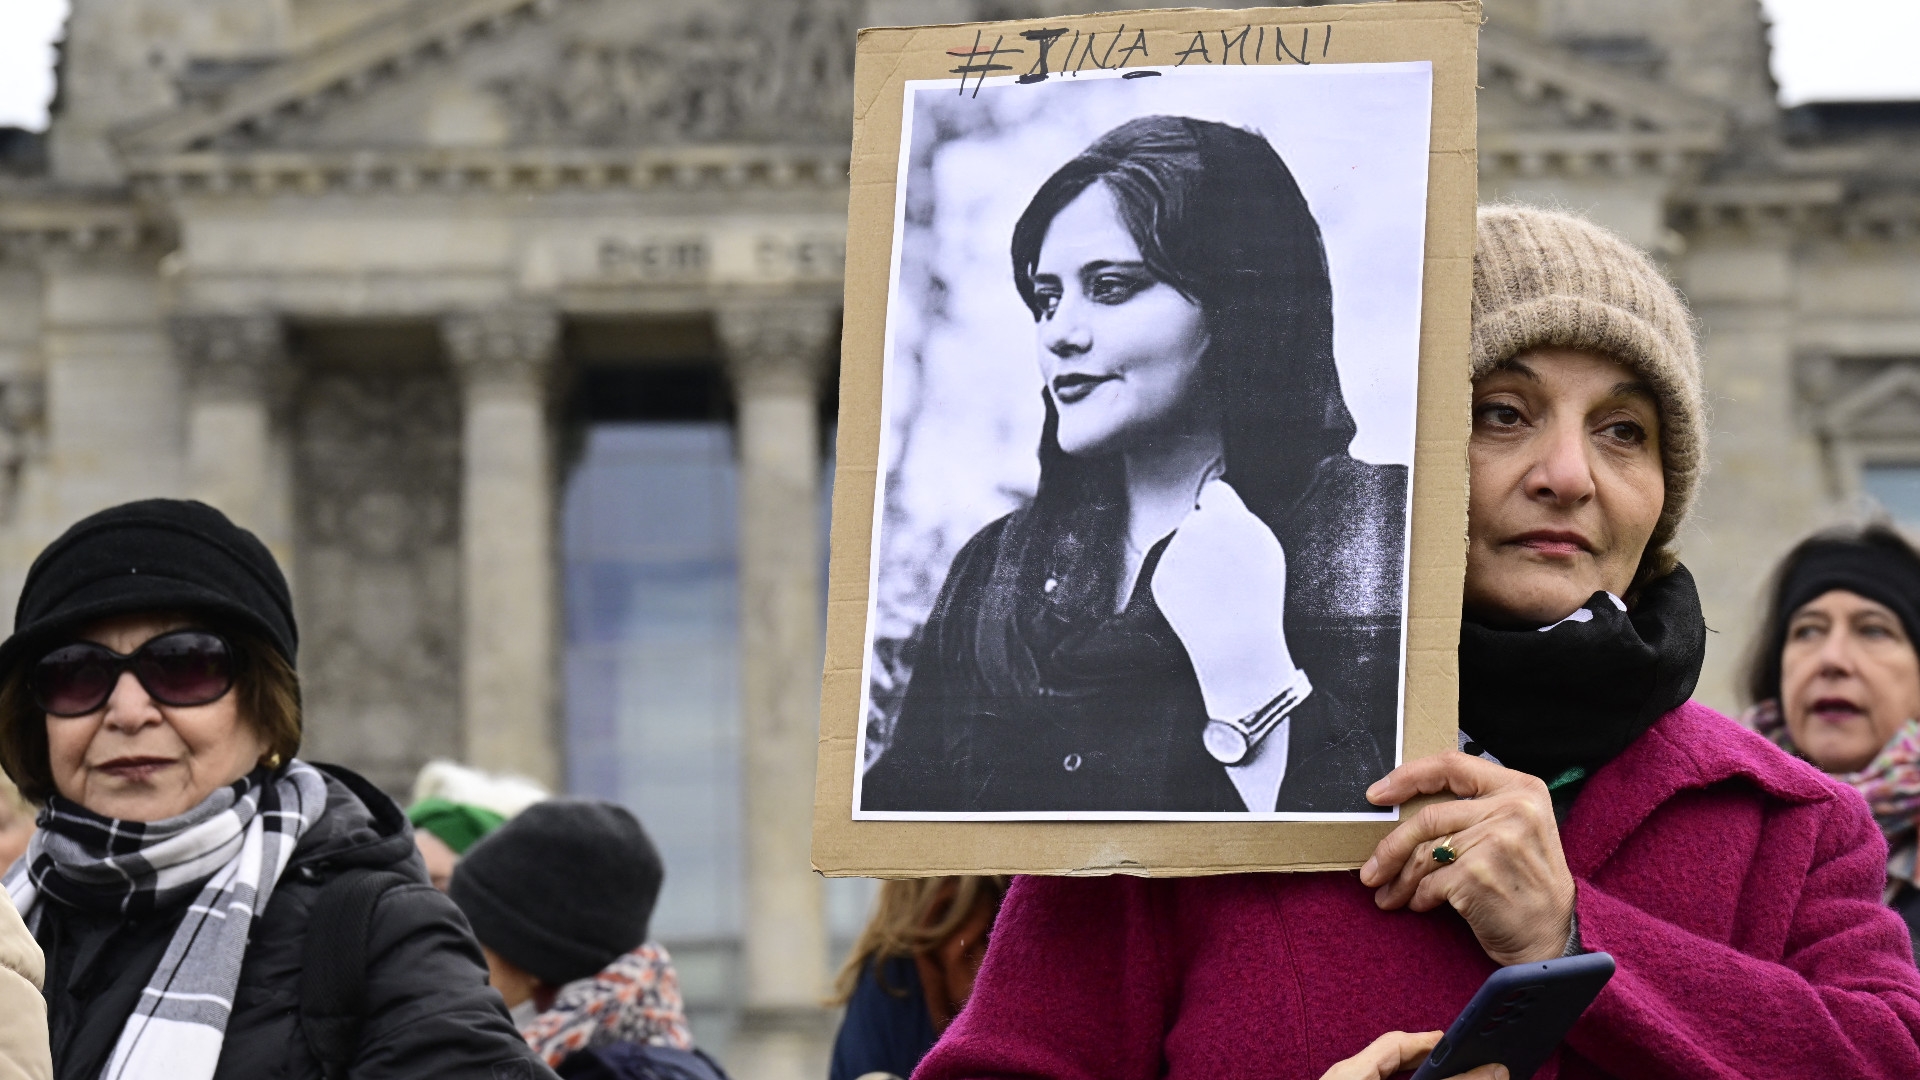 A woman holds a portrait of Mahsa Amini, a young Iranian woman who died after being arrested in Tehran by the Islamic Republic's morality police, during a demonstration in front of the German lower house of parliament on 8 March 2023 (AFP)